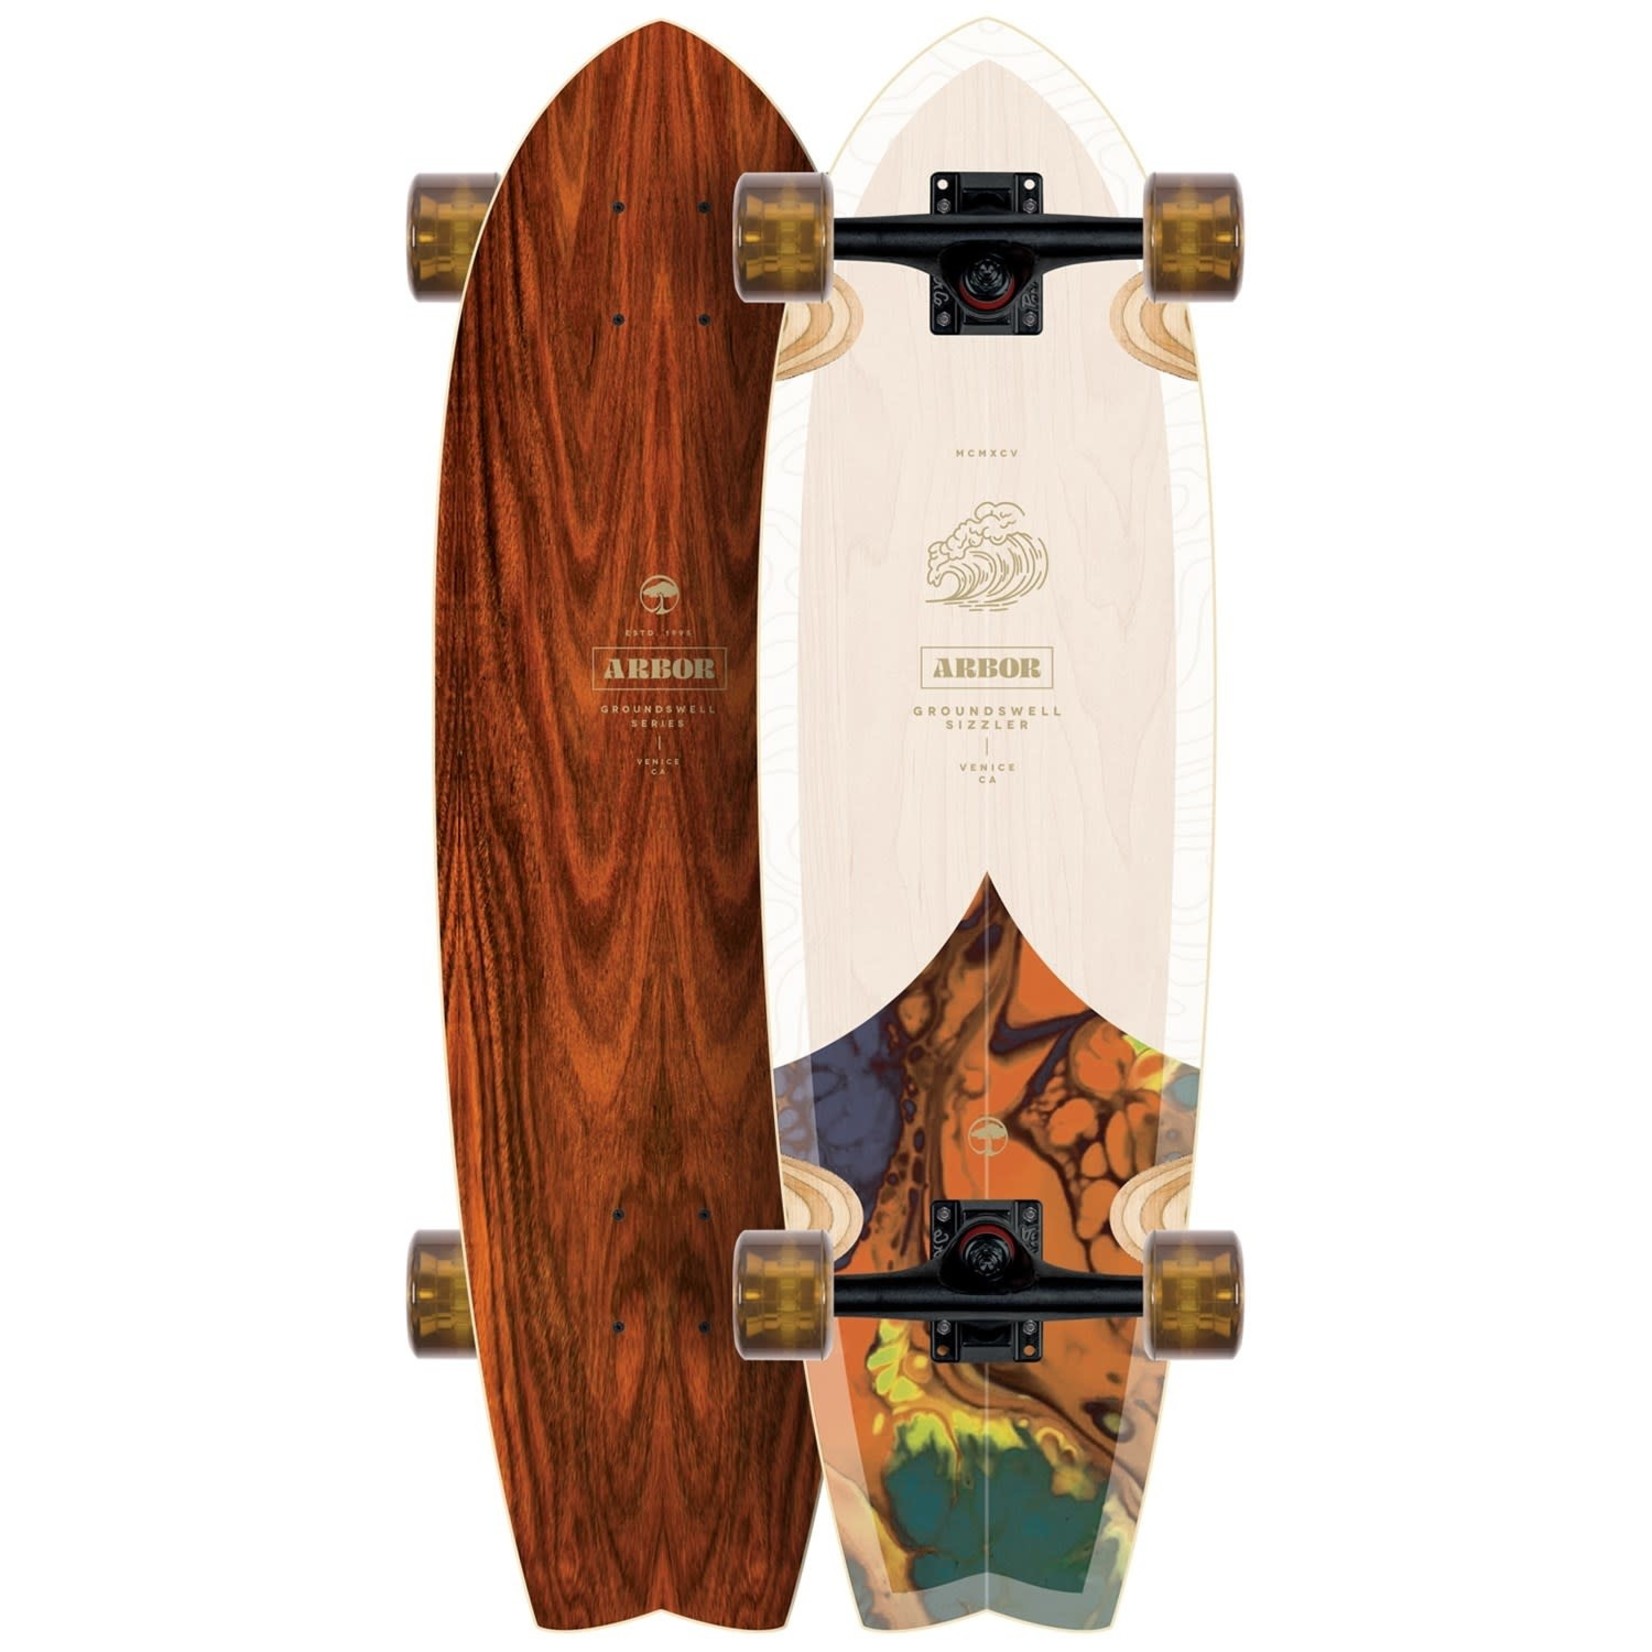 Arbor Arbor Groundswell Sizzler 30.5 in Cruiser Complete